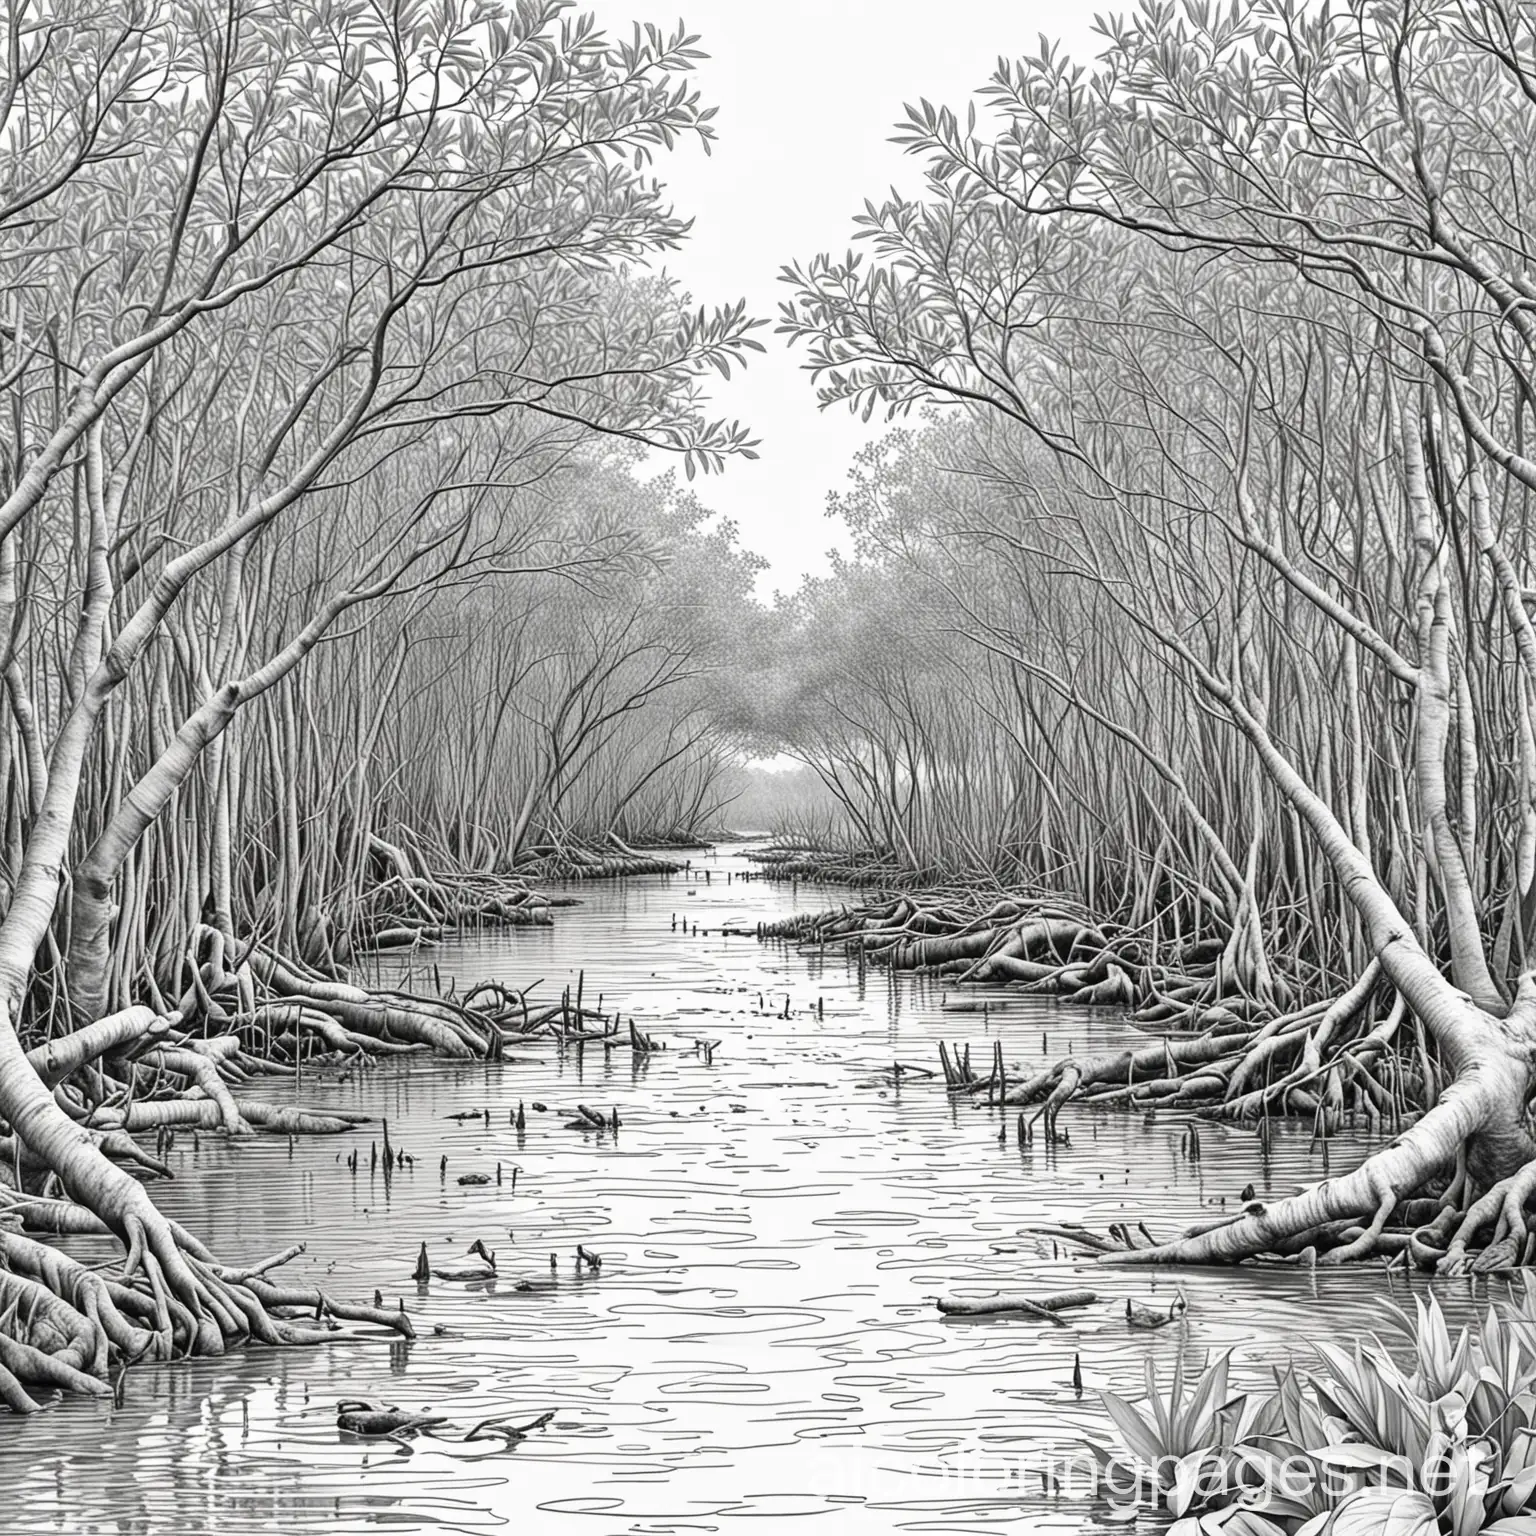 MANGROVES AND MUDDY RIVER BANKS, Coloring Page, black and white, line art, white background, Simplicity, Ample White Space. The background of the coloring page is plain white to make it easy for young children to color within the lines. The outlines of all the subjects are easy to distinguish, making it simple for kids to color without too much difficulty